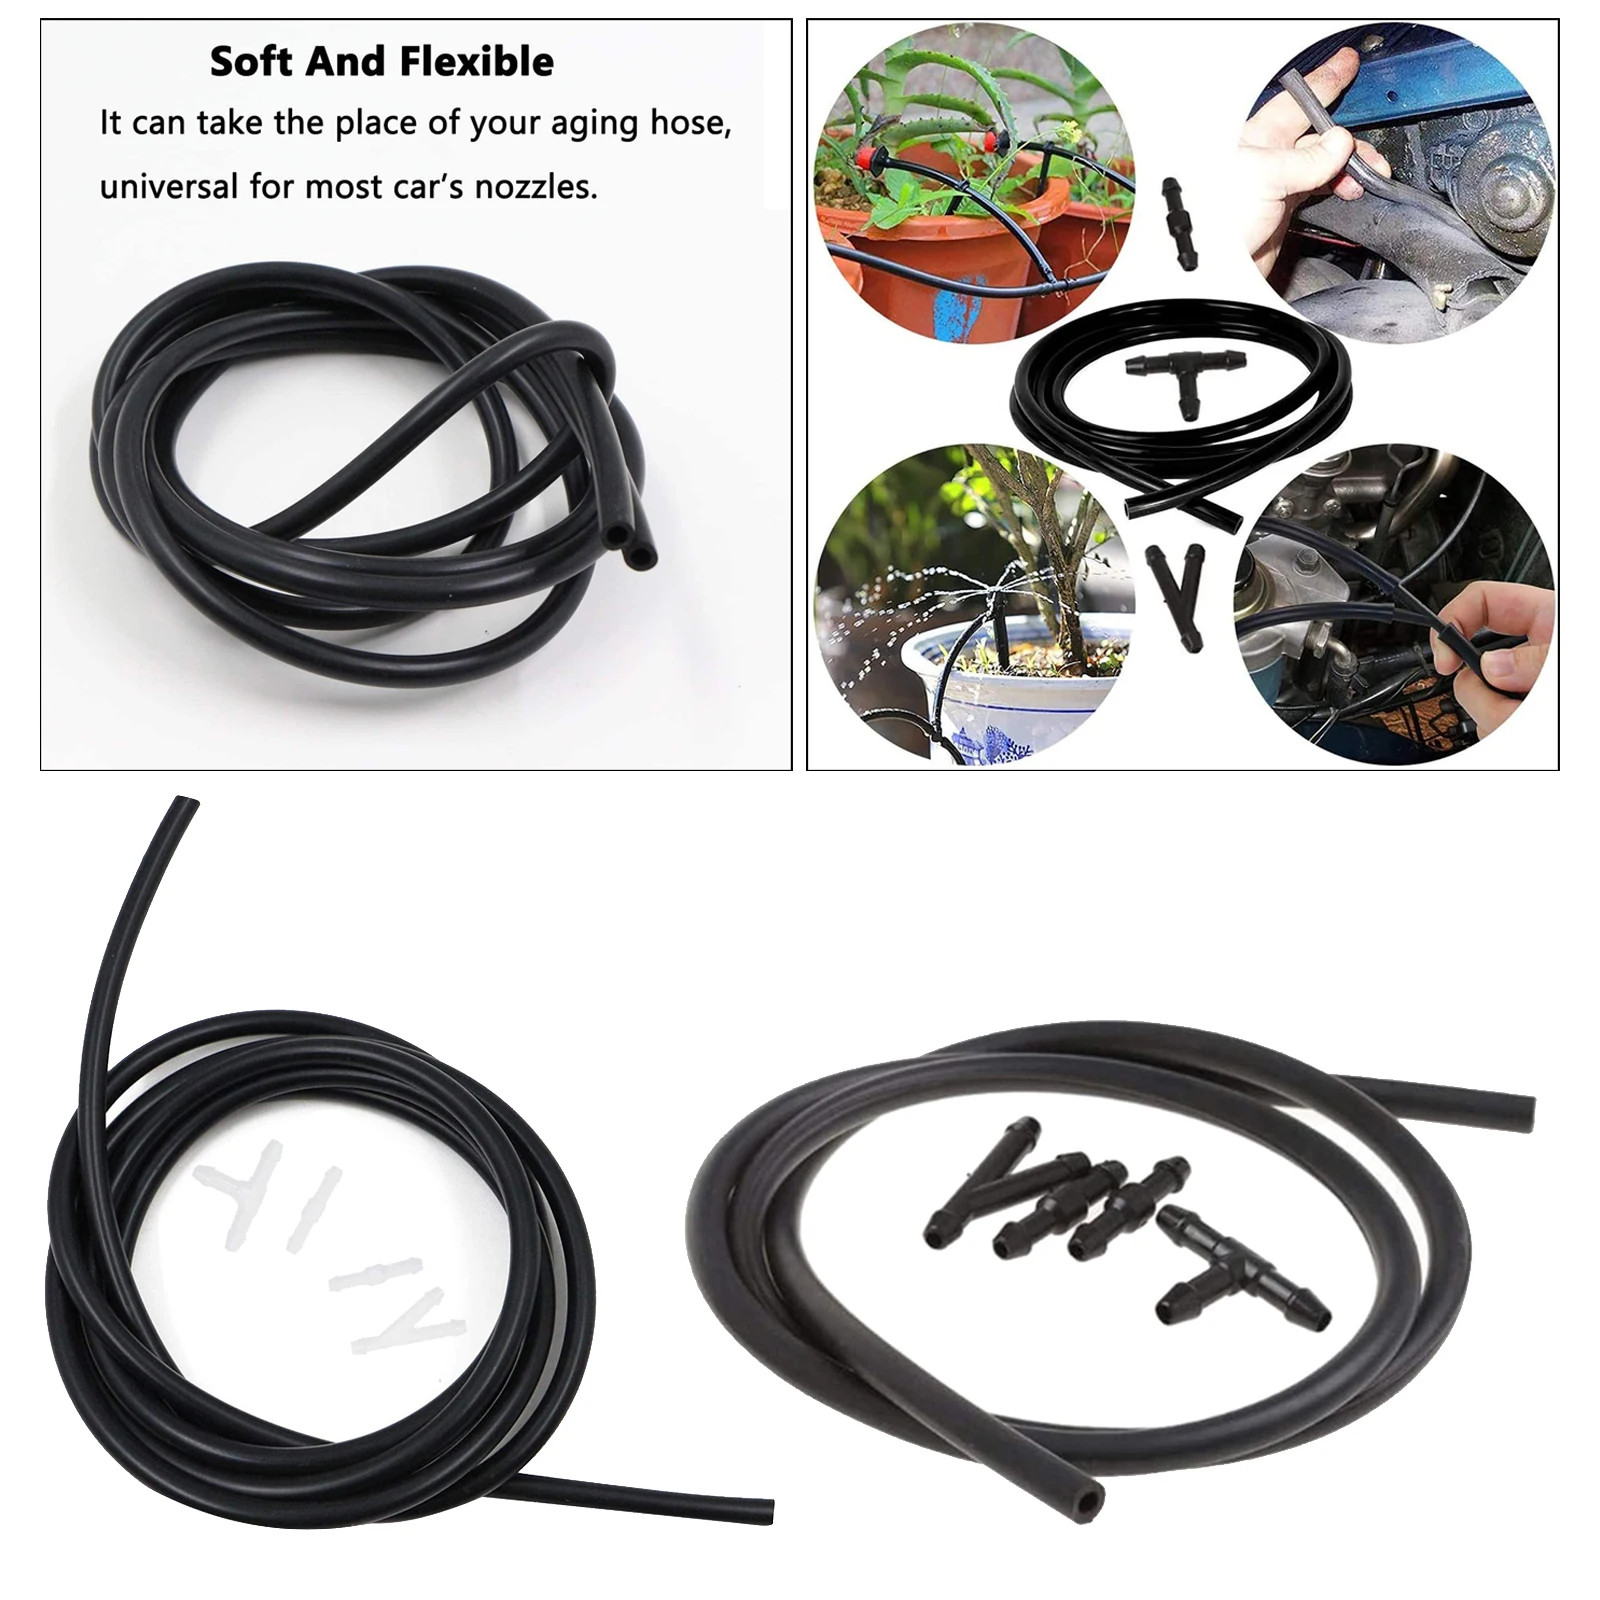 Windshield Washer Hose Kit, Universal Washer Fluid Hose with Hose Connector (2 Meters Length)